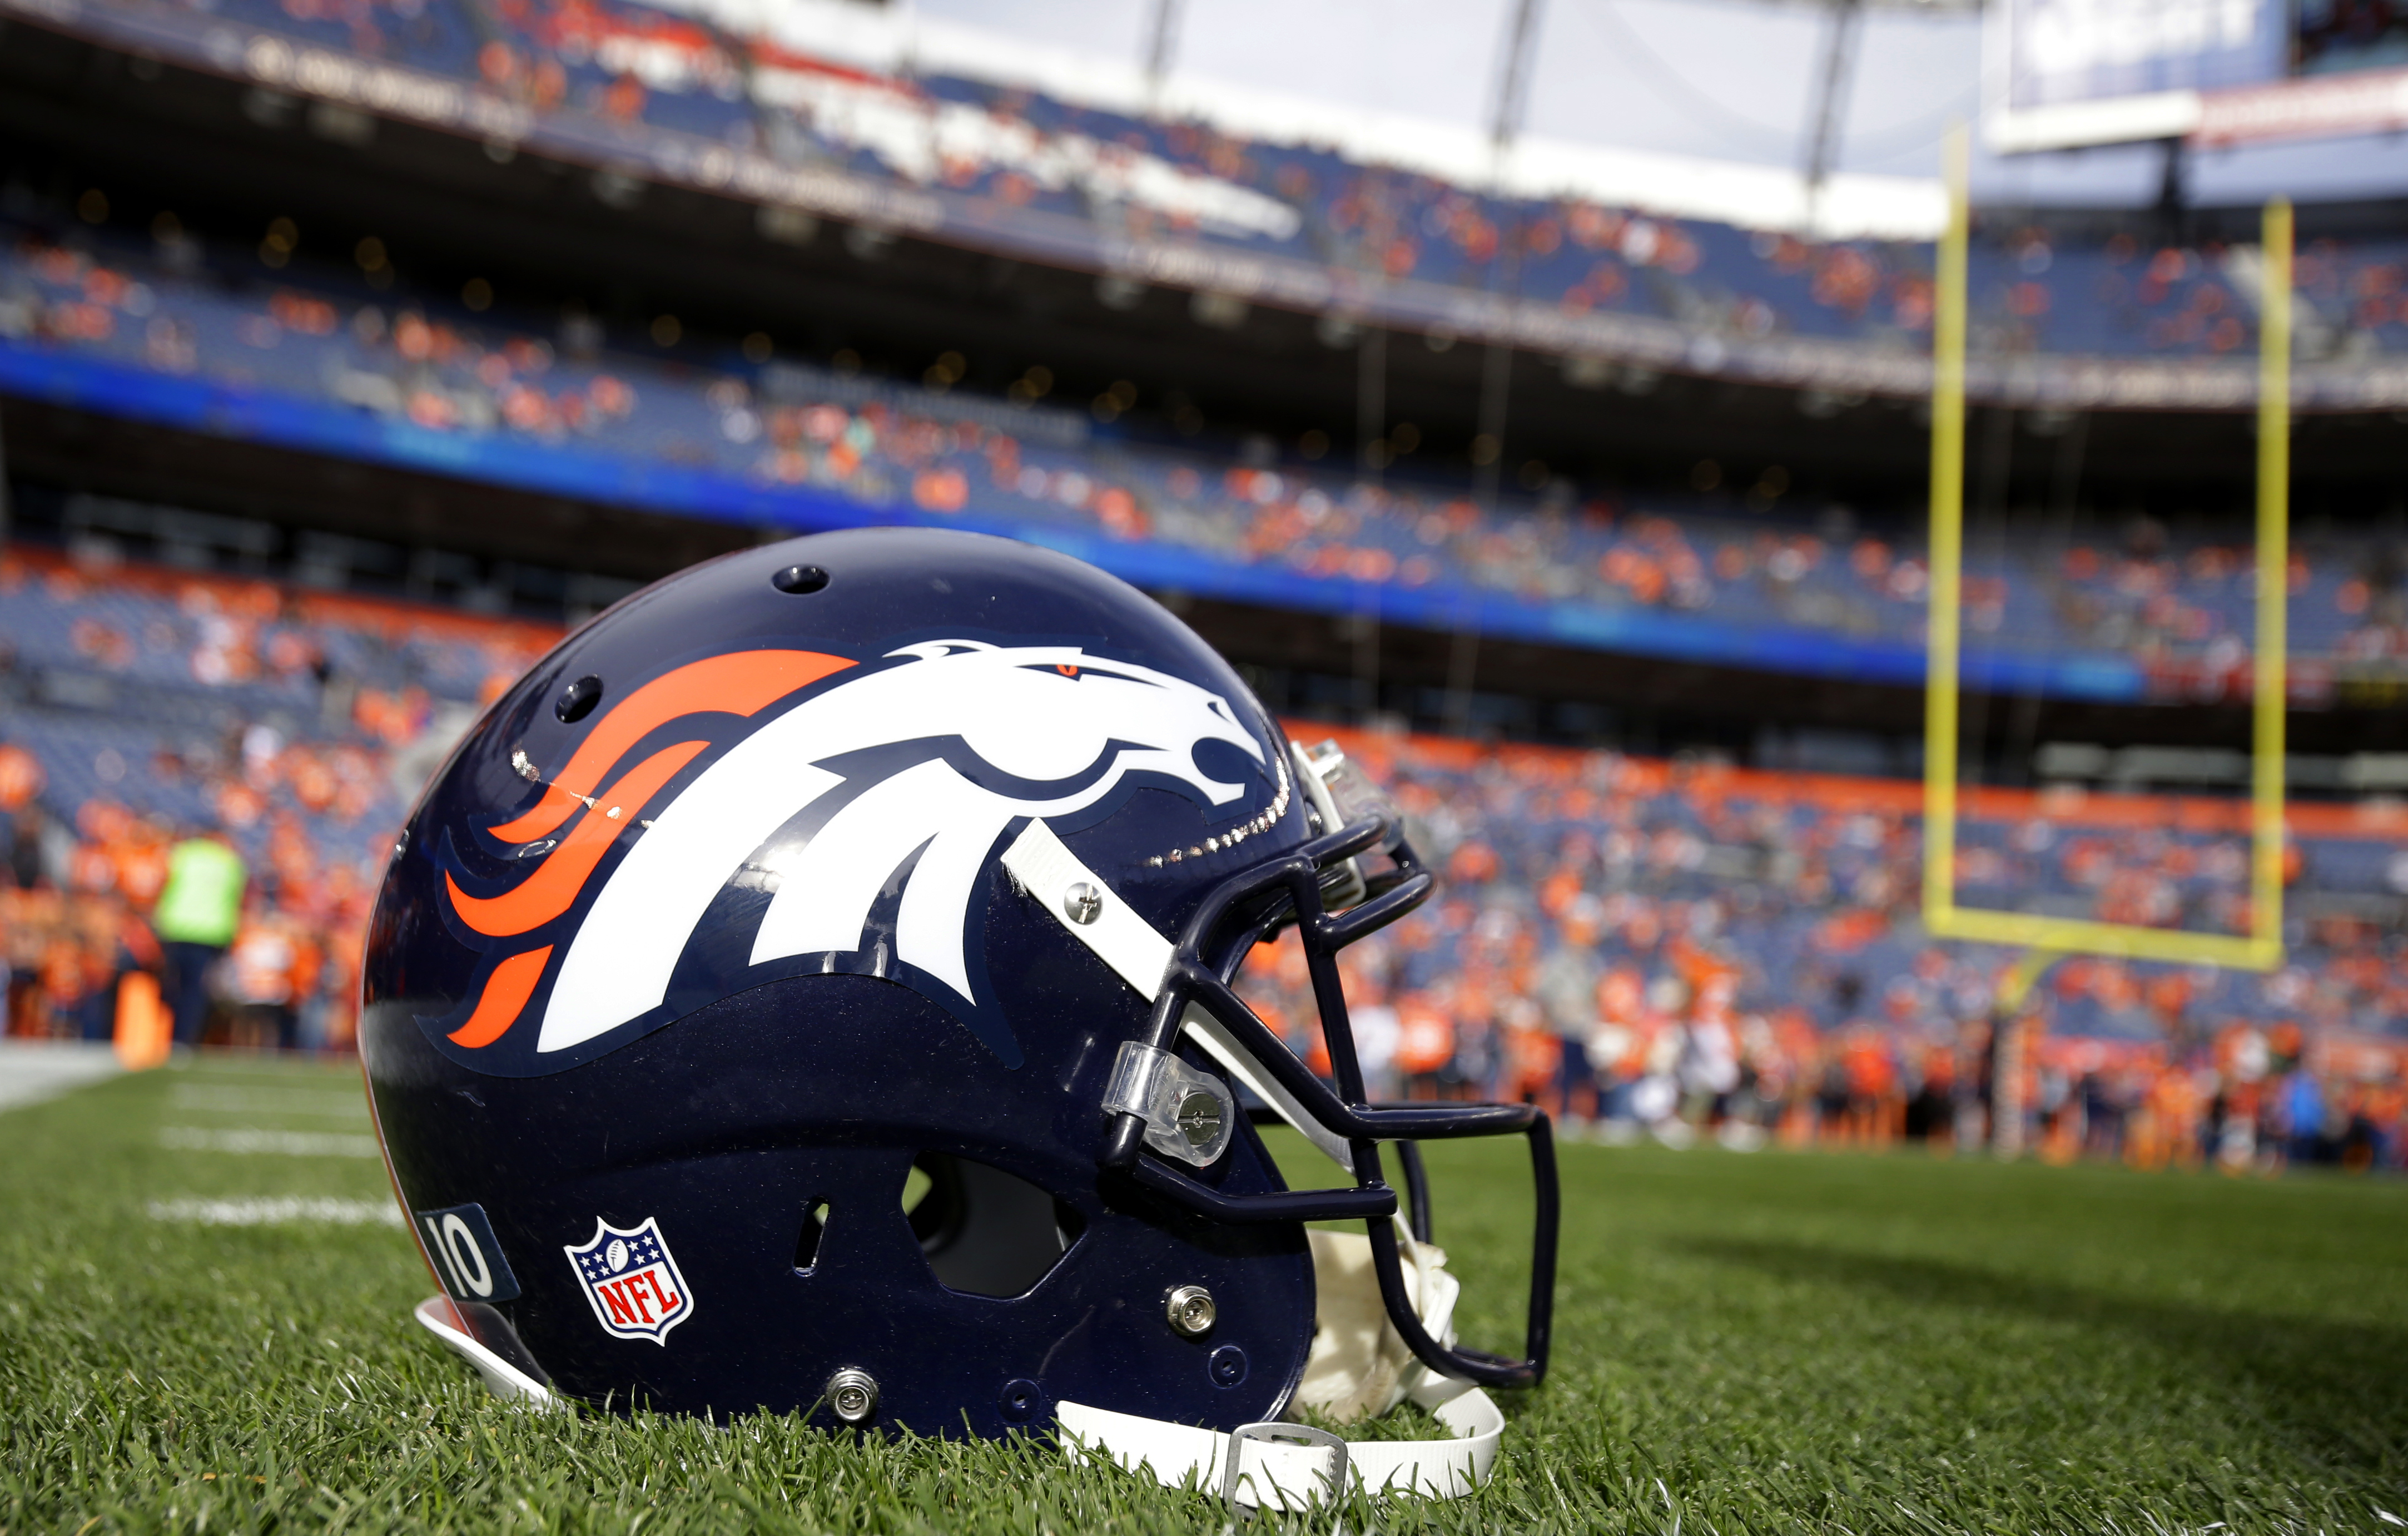 Denver Broncos announce they are officially on the market